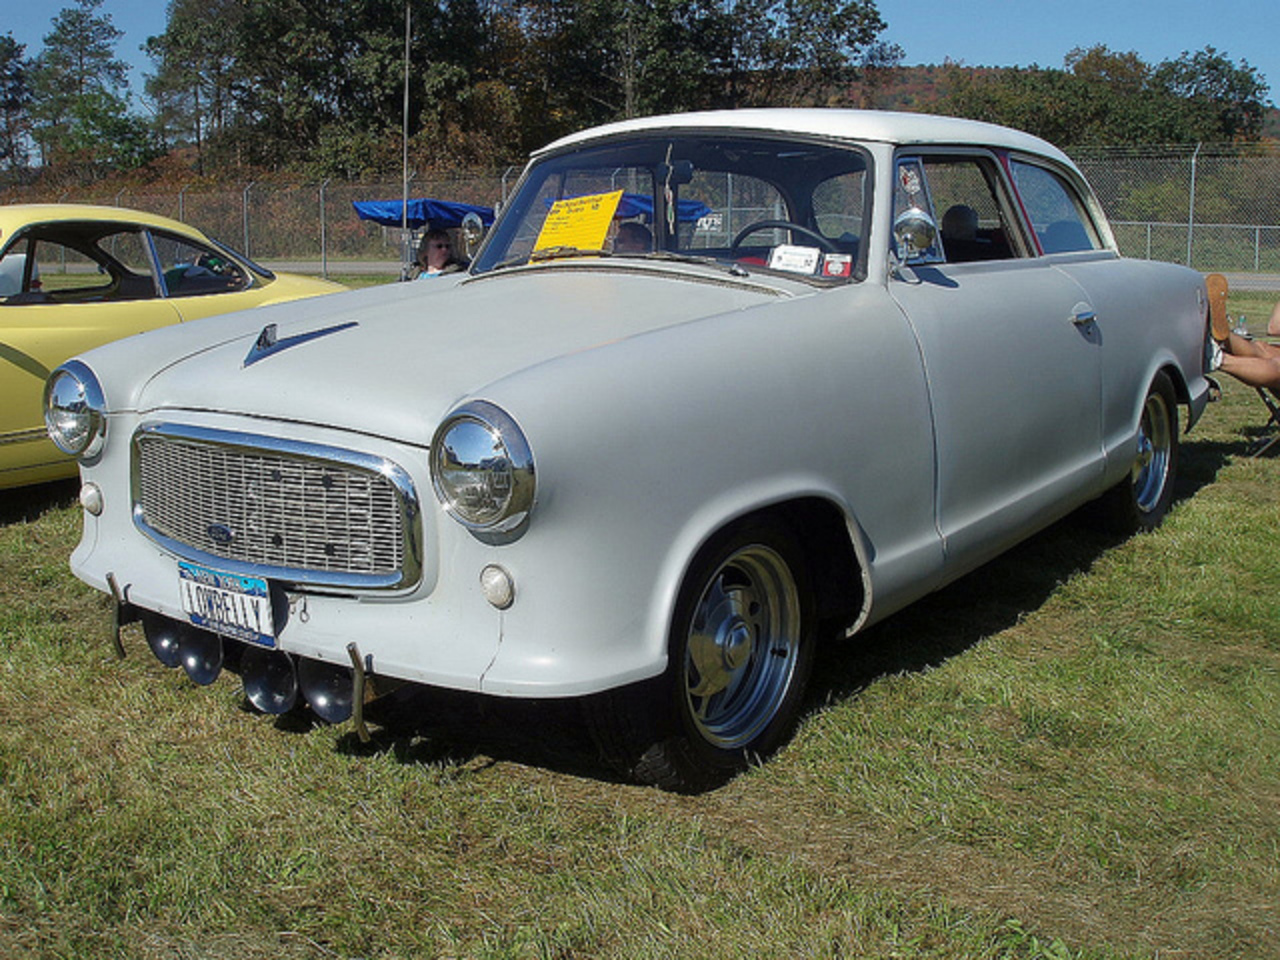 Nash Rambler dragster Photo Gallery: Photo #08 out of 11, Image ...